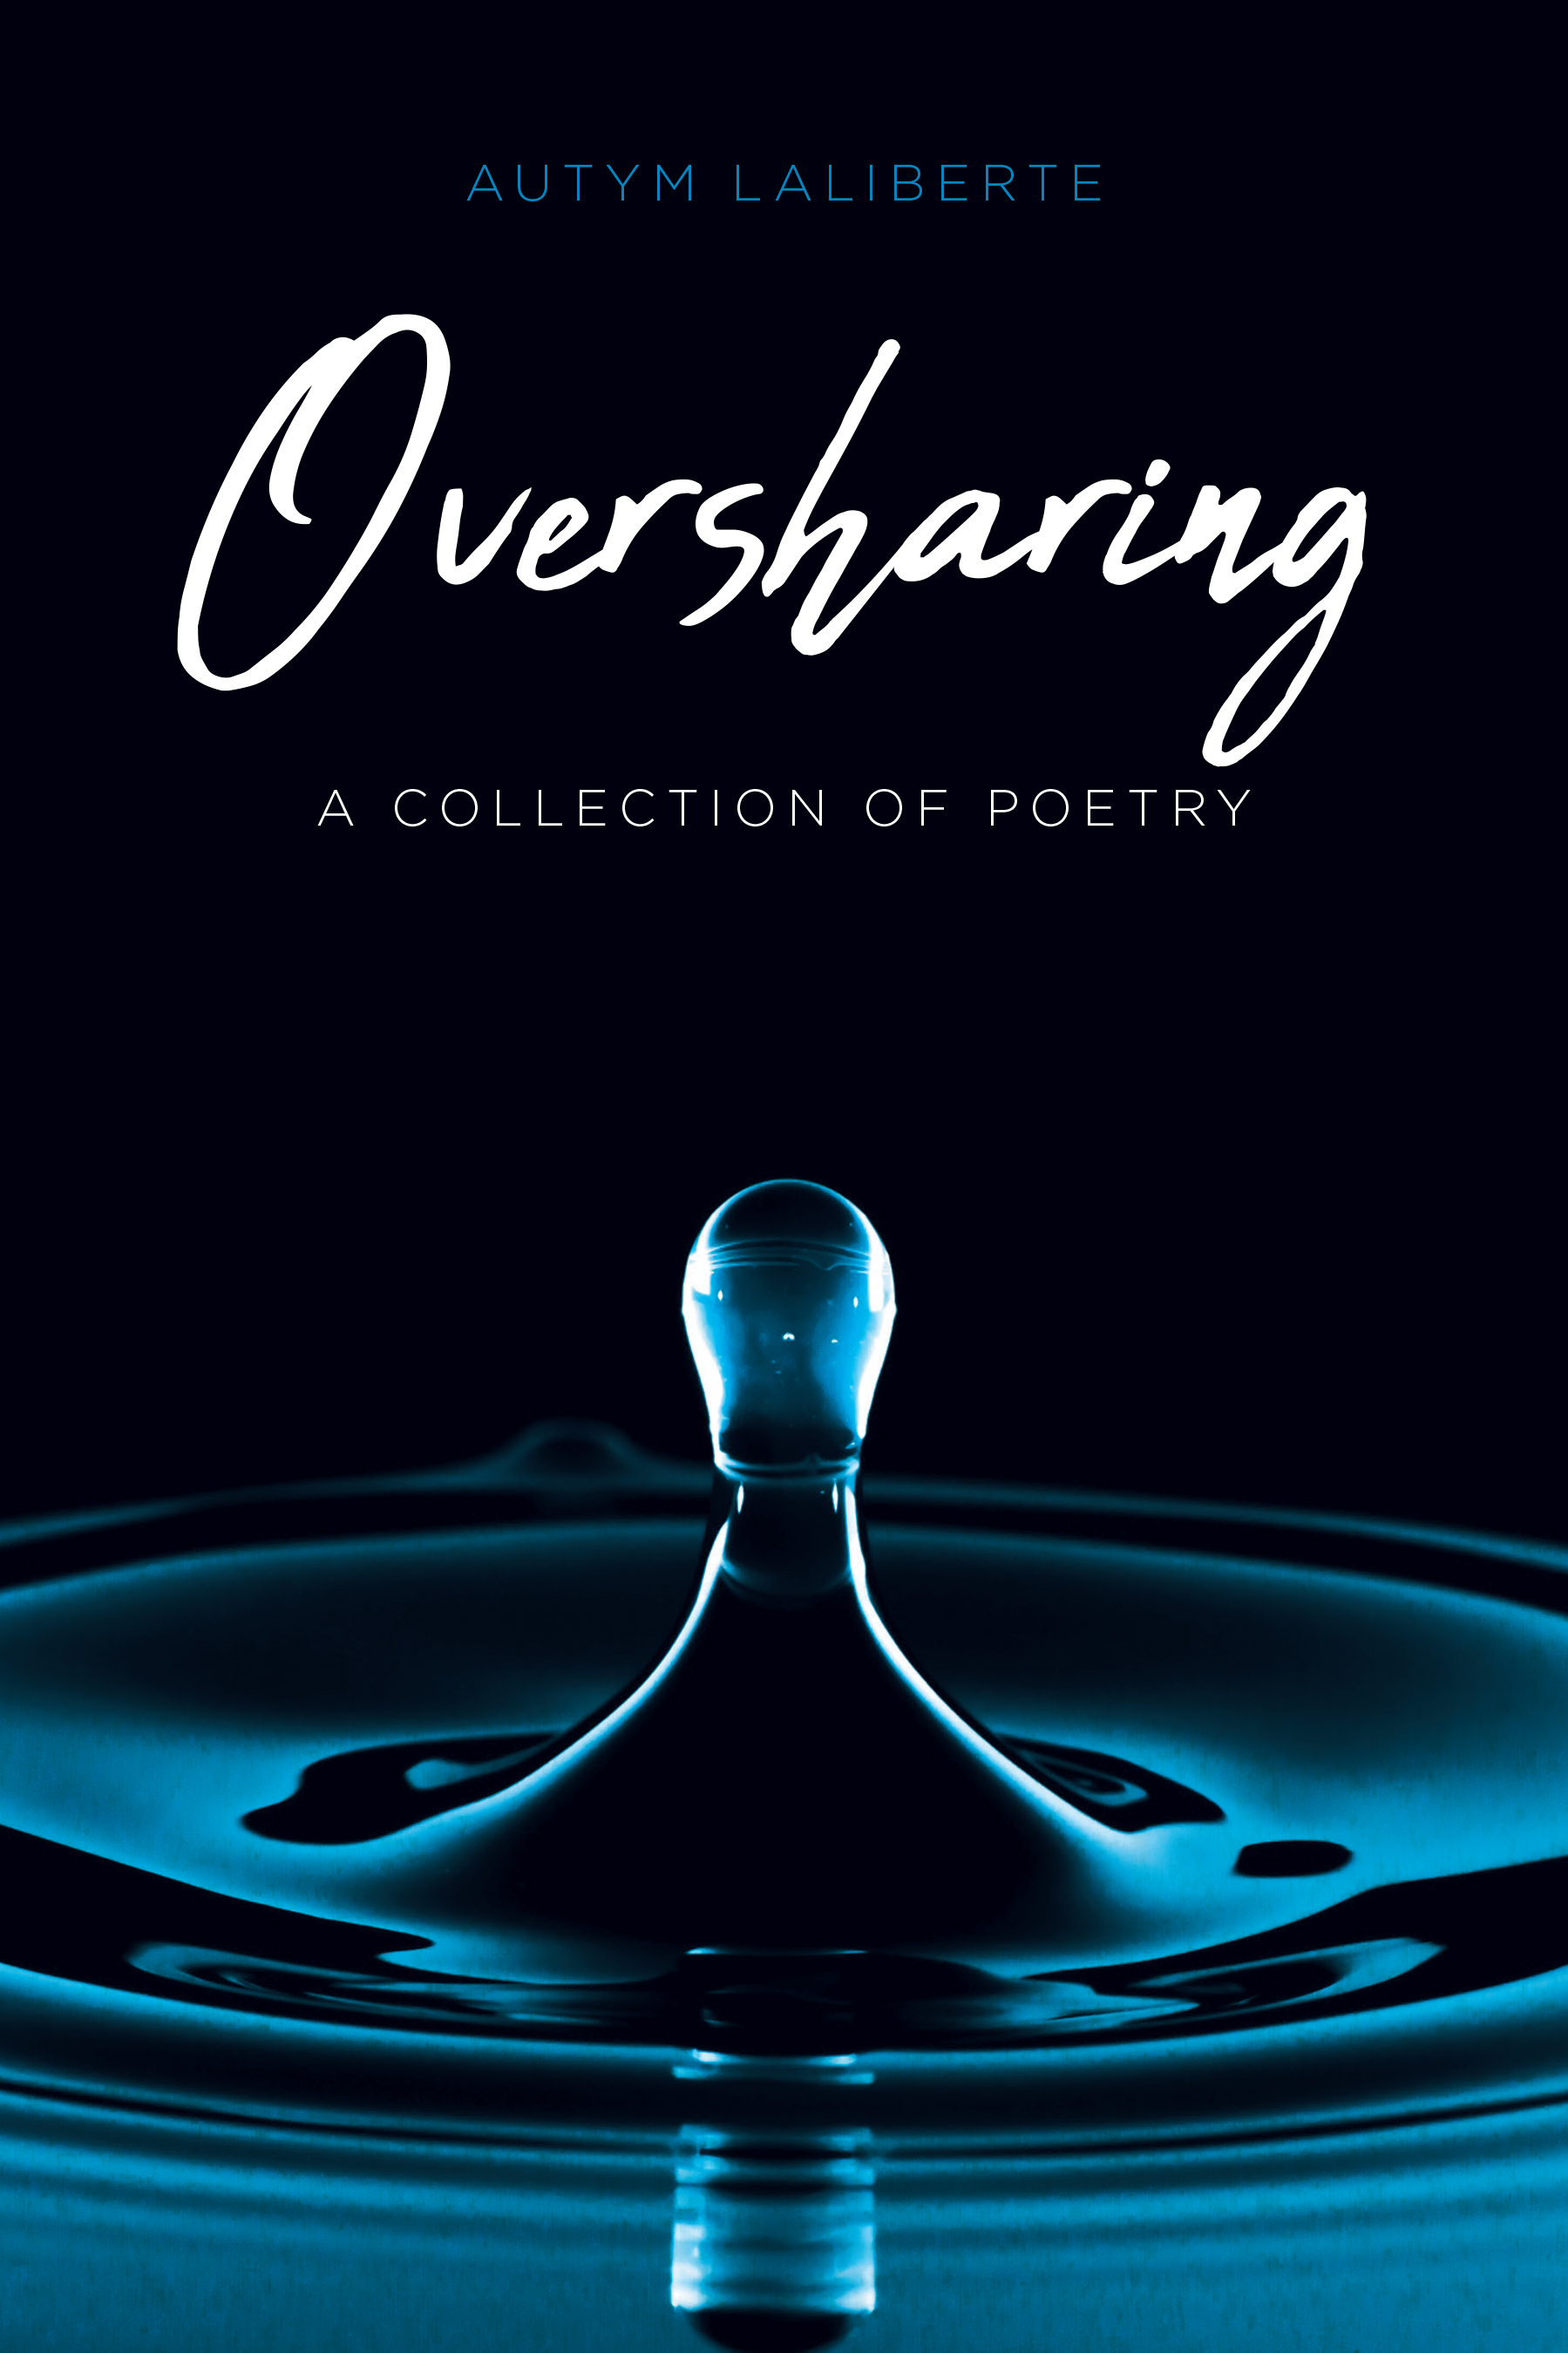 Autym Laliberte’s New Book, "Oversharing: A Collection of Poetry," Delving Into Themes of Abuse, Depression, Heartbreak, and the Complexities of Human Relationships